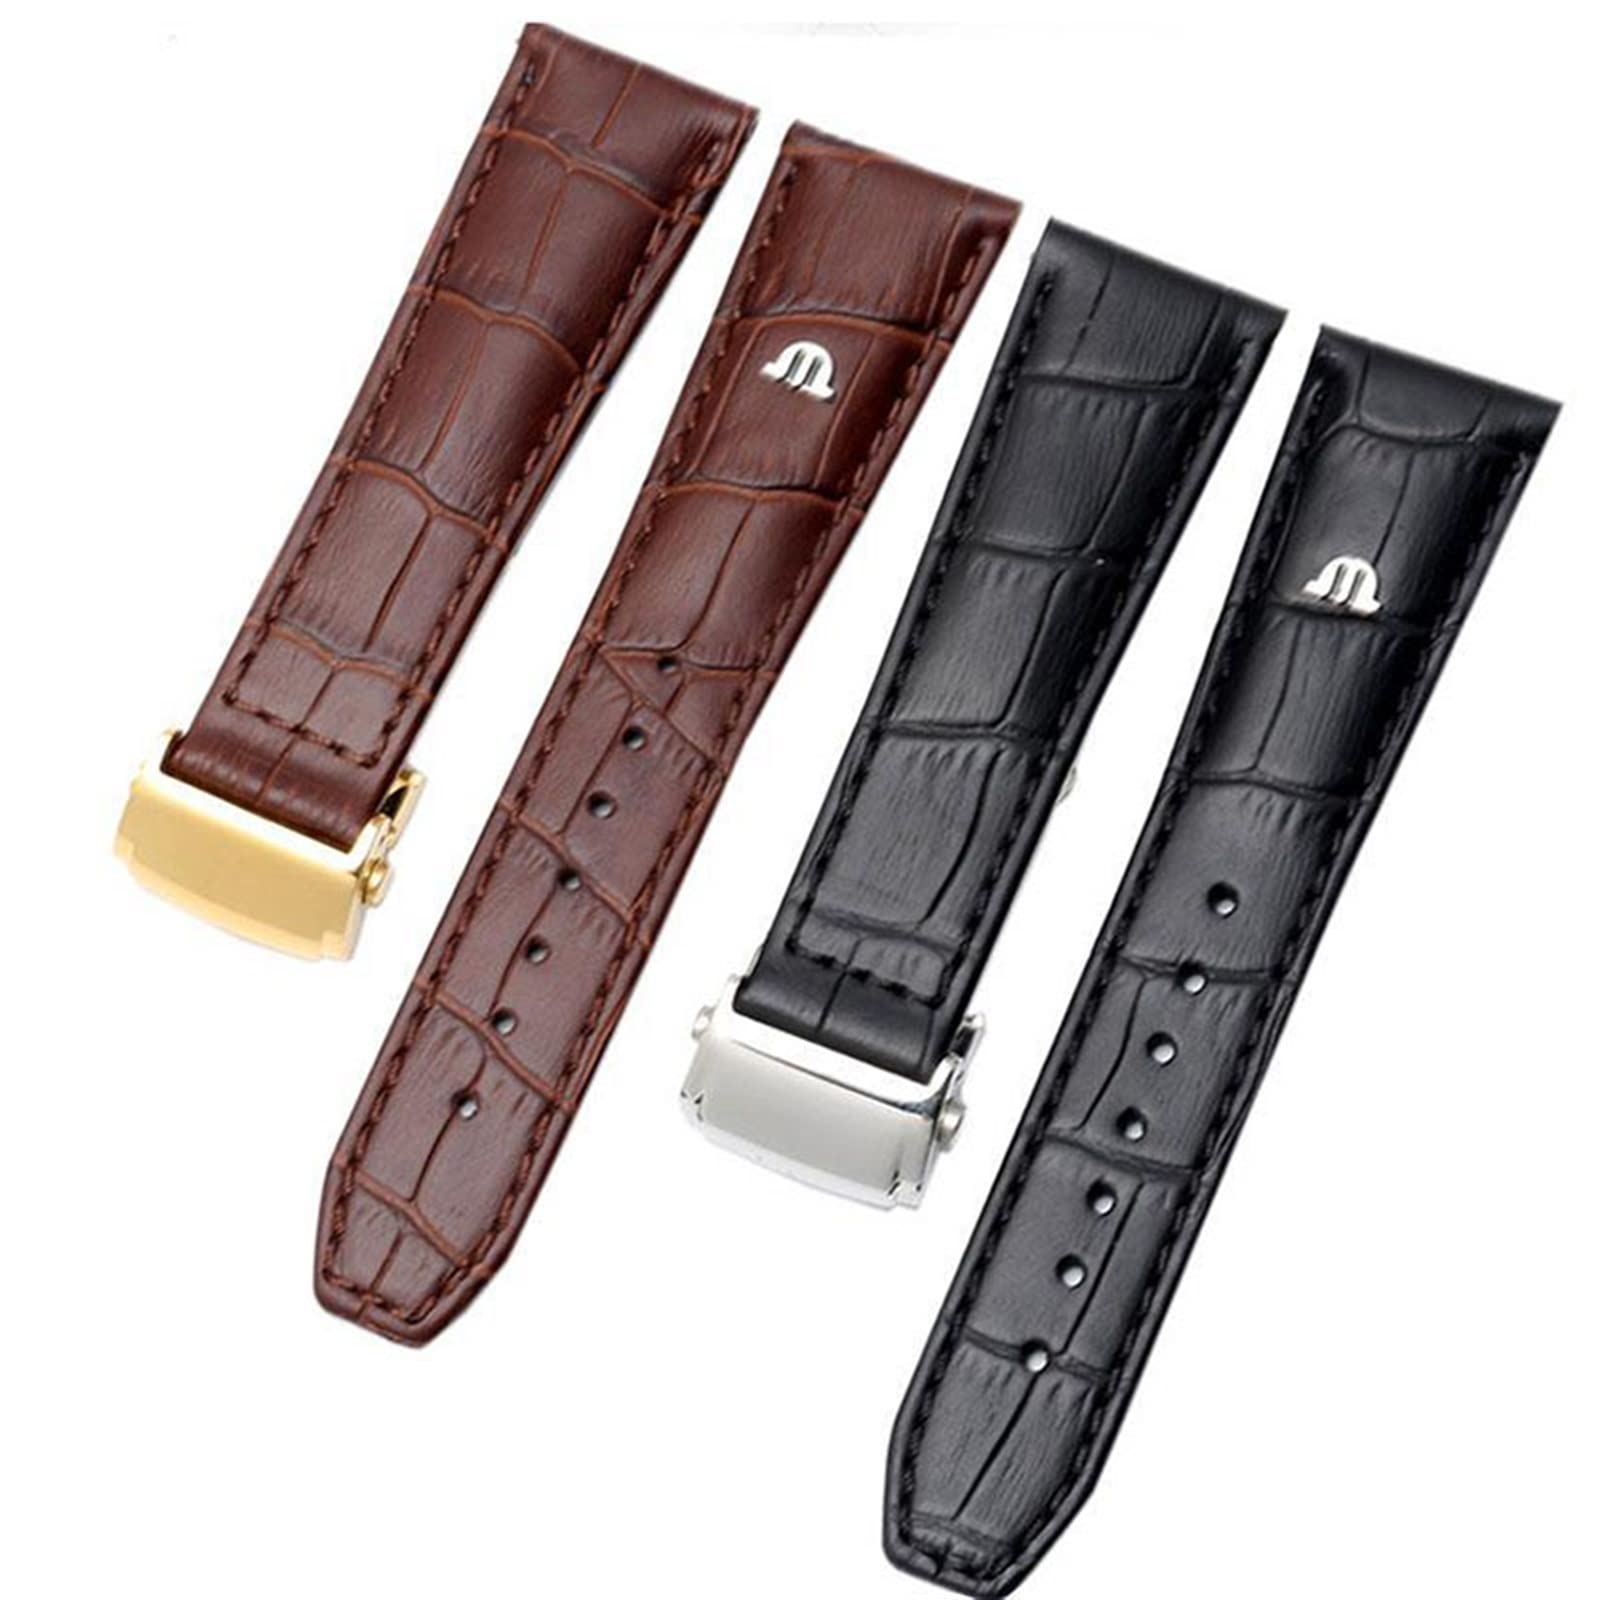 COEPMG Genuine Leather watchband For MAURICE LACROIX watches strap black brown 20mm 22mm with folding buckle bracelet